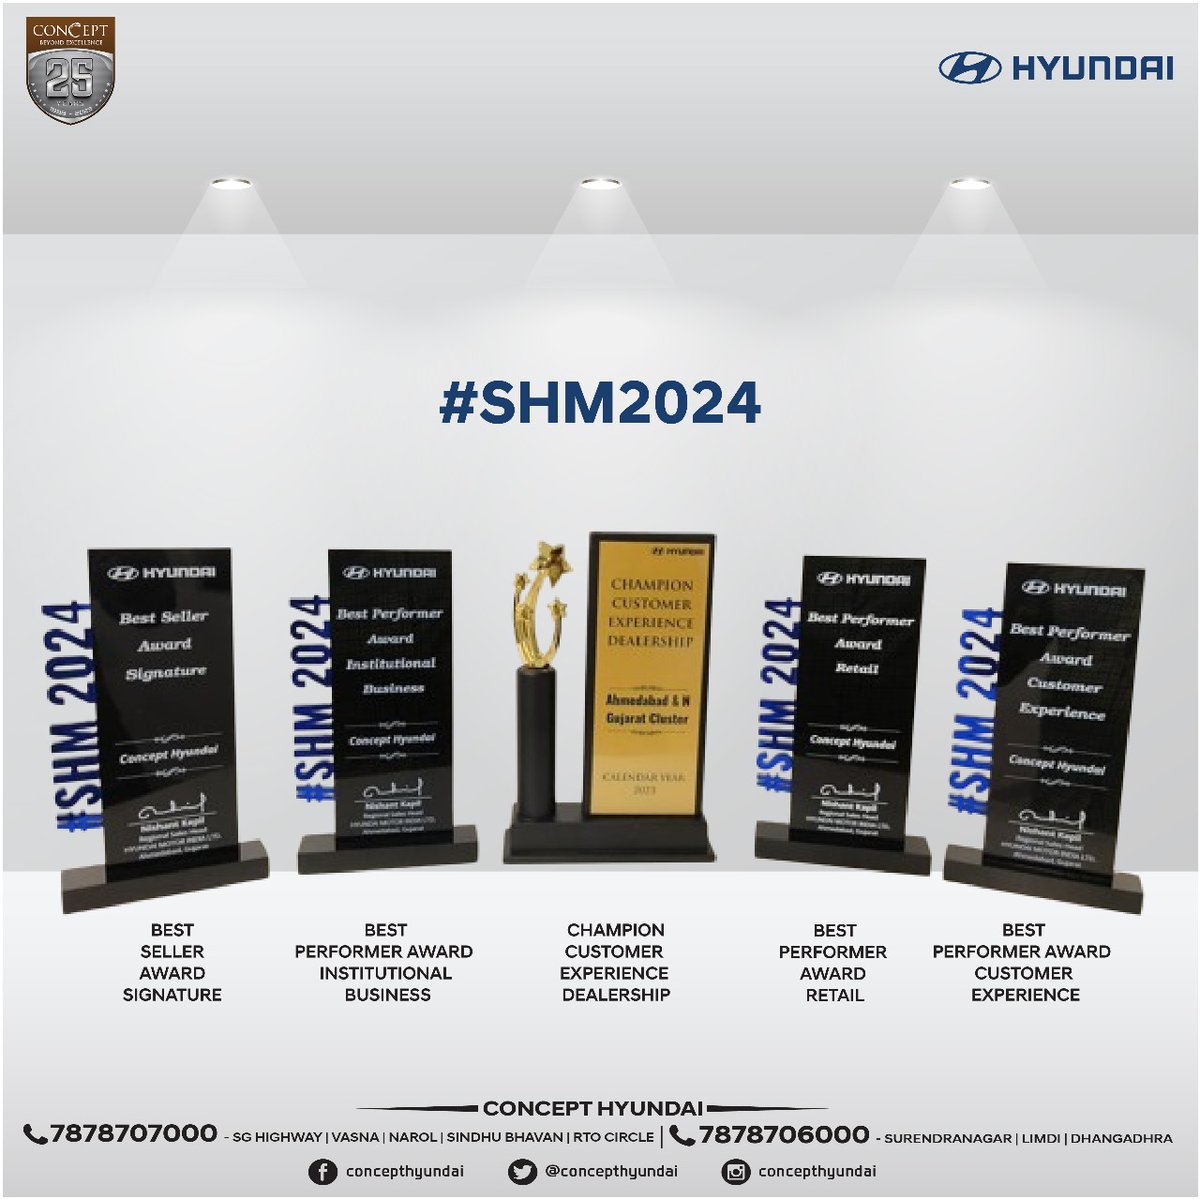 𝐖𝐞 𝐀𝐫𝐞 𝐓𝐡𝐫𝐢𝐥𝐥𝐞𝐝 𝐭𝐨 𝐀𝐧𝐧𝐨𝐮𝐧𝐜𝐞

Concept Hyundai is incredibly proud to share that we have been honored with FIVE prestigious national awards from Hyundai India!

#ConceptHyundai #ConceptGroup #AwardWinners #HyundaiIndia #CustomerSatisfaction #WinningMoment